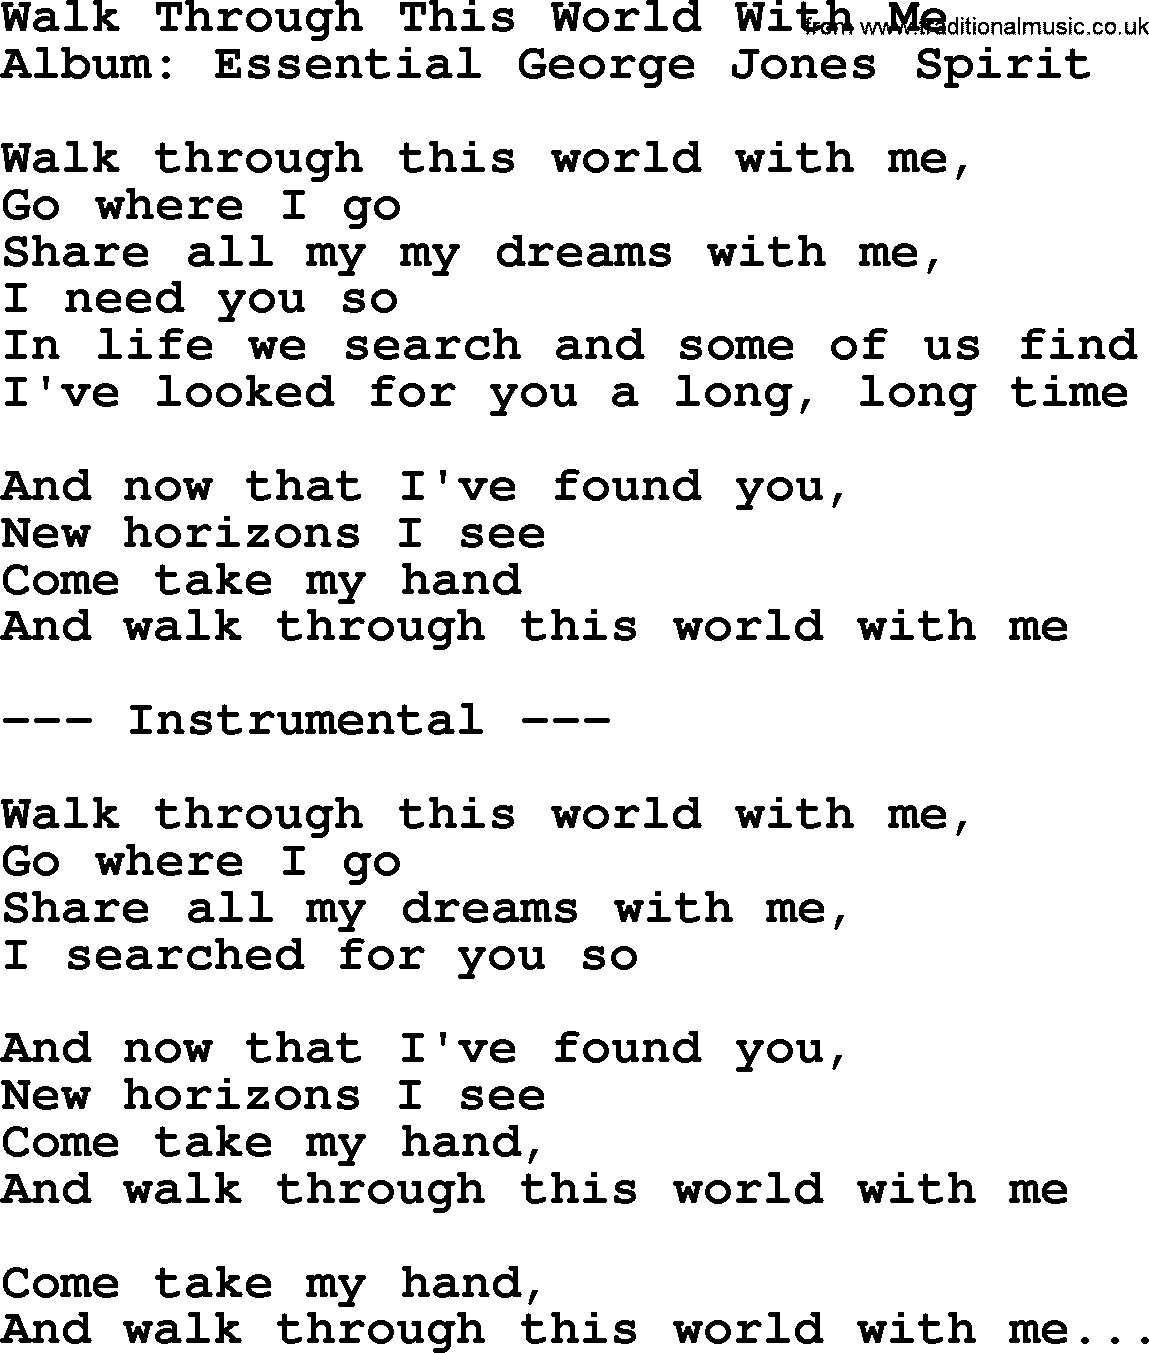 Walk Through This World With Me by George Jones - Counrty song lyrics